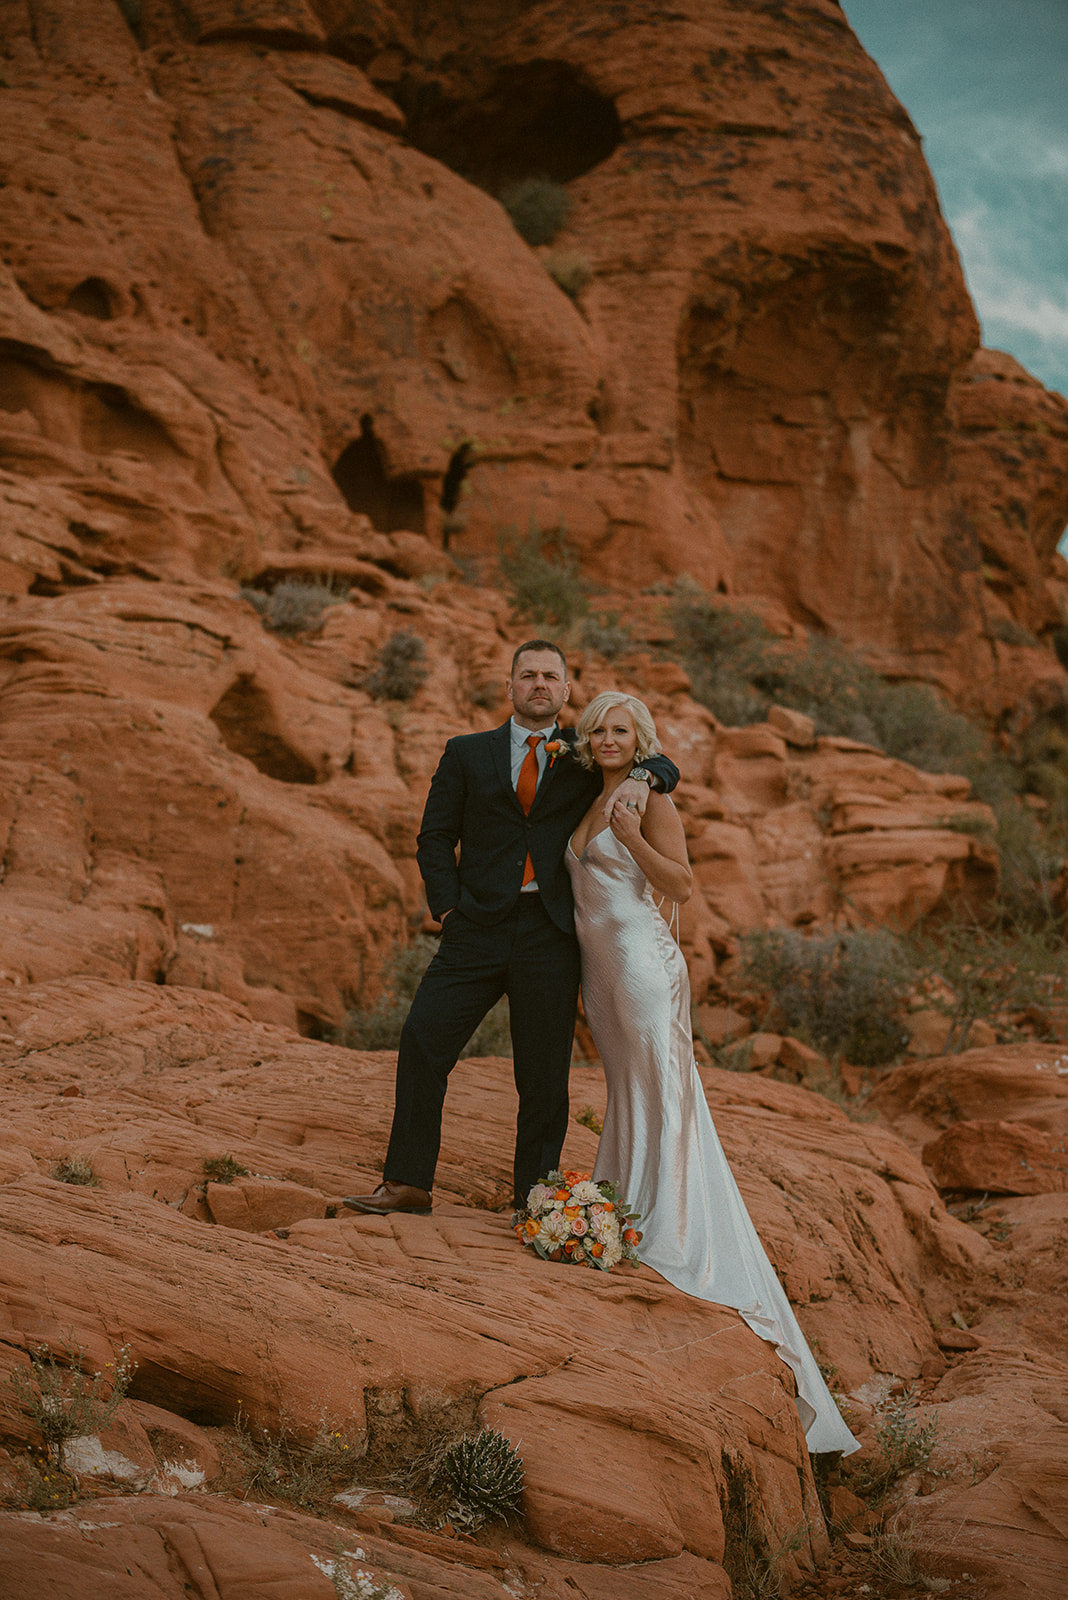 Bride and groom posing for the camera during their Red Rock Canyon elopement shoot